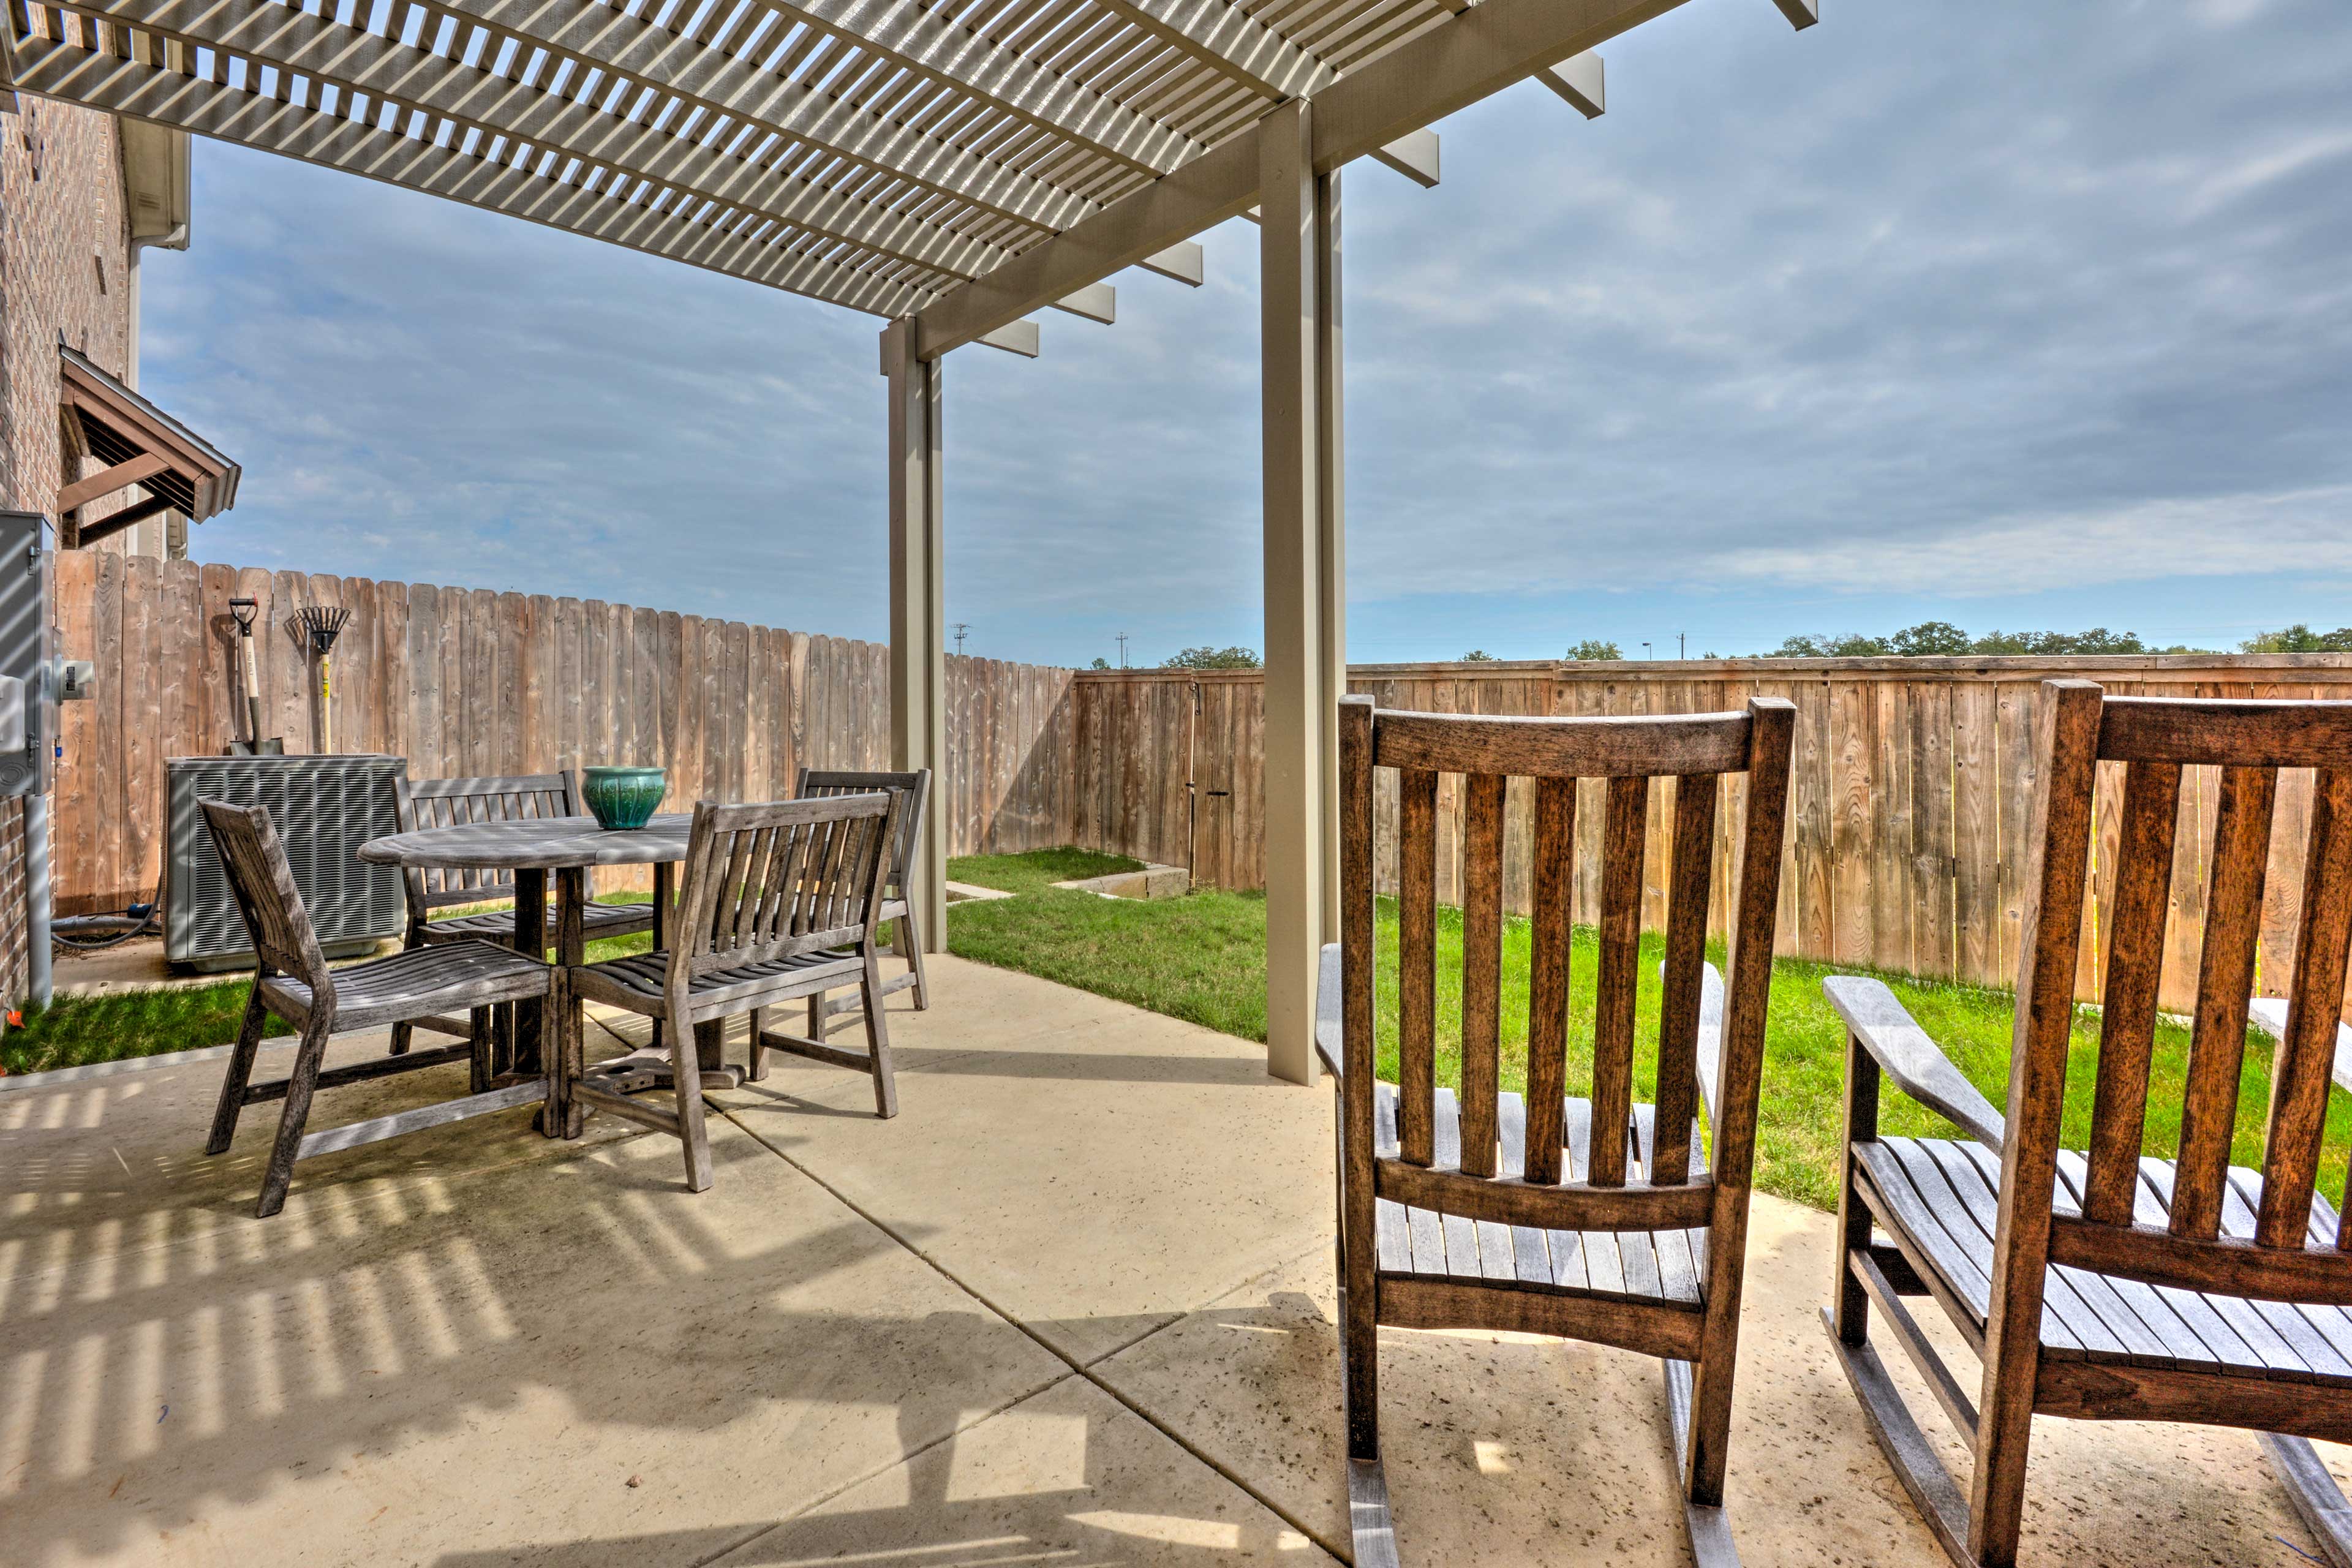 College Station Townhouse w/ Private Patio